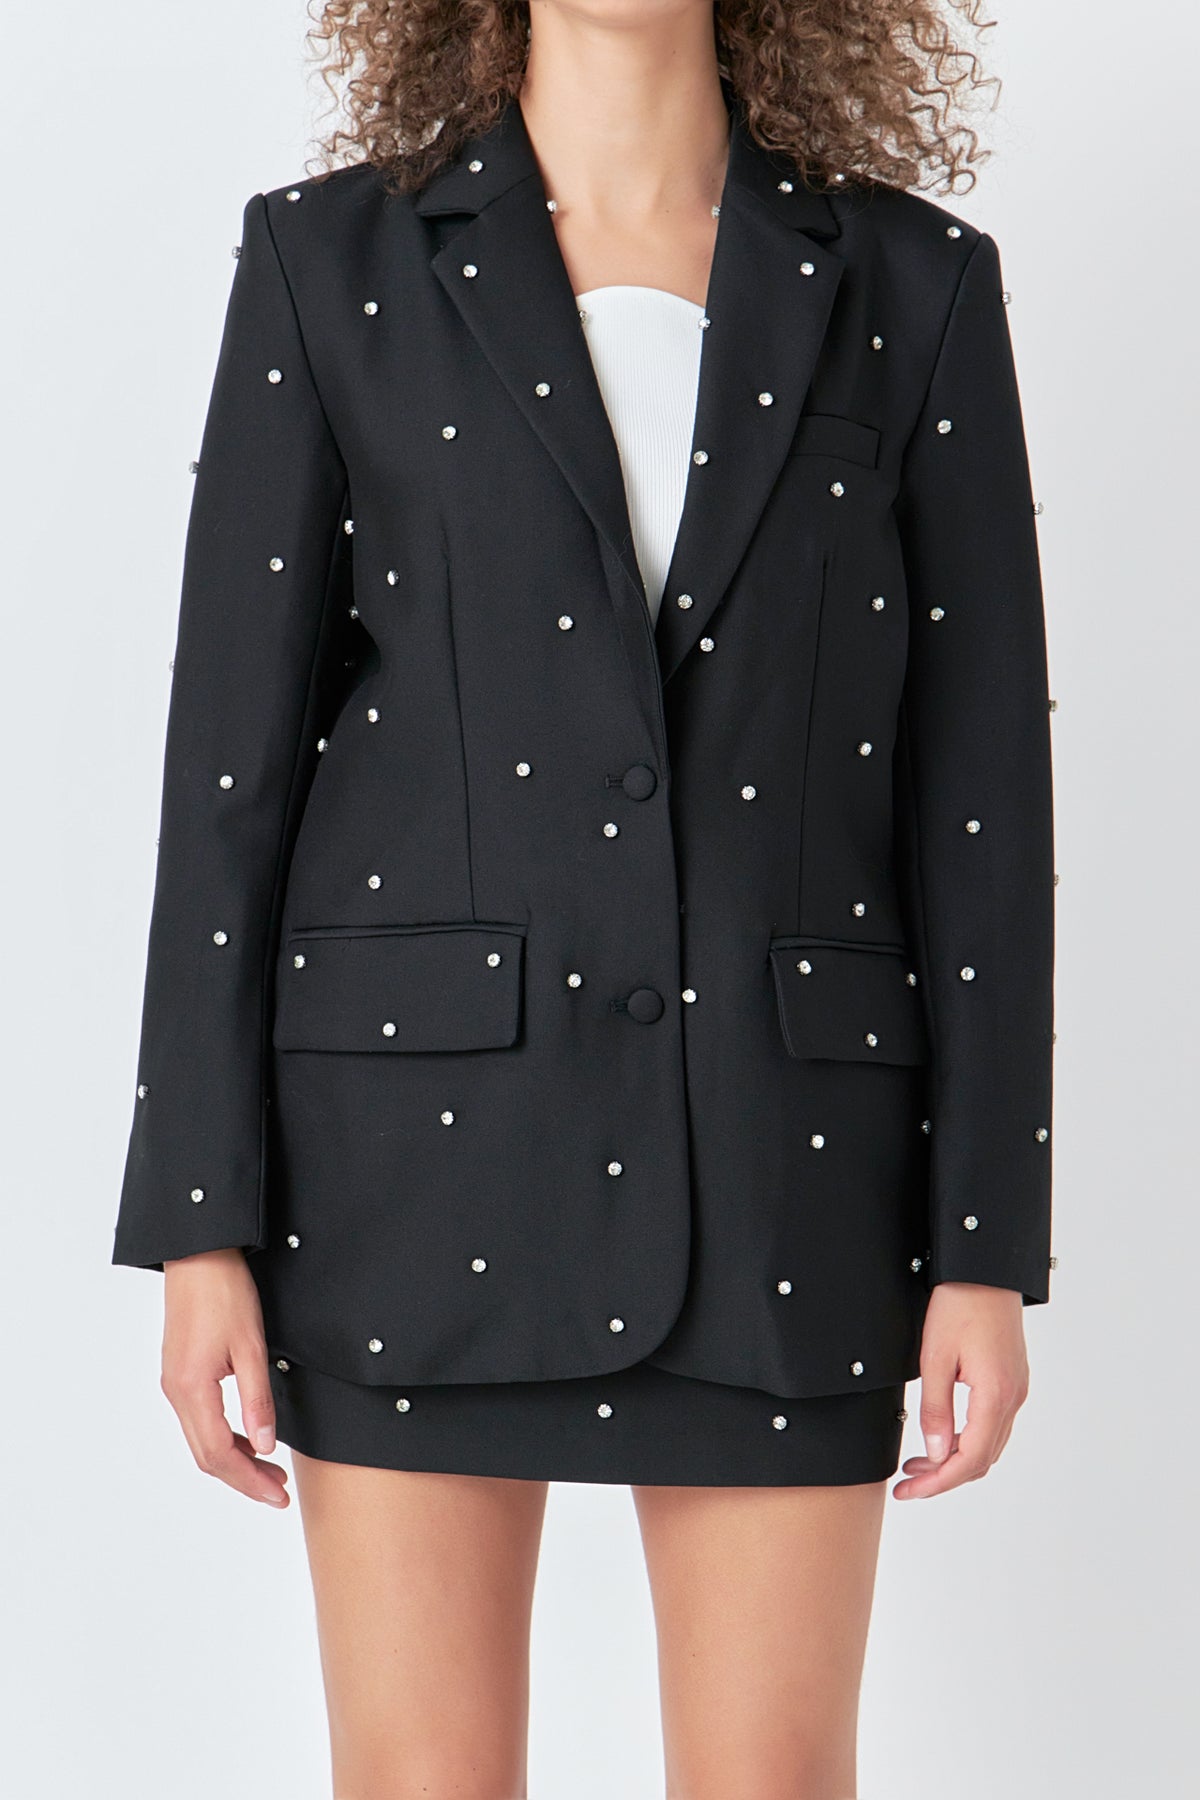 ENDLESS ROSE - Premium Embellished Blazer - BLAZERS available at Objectrare